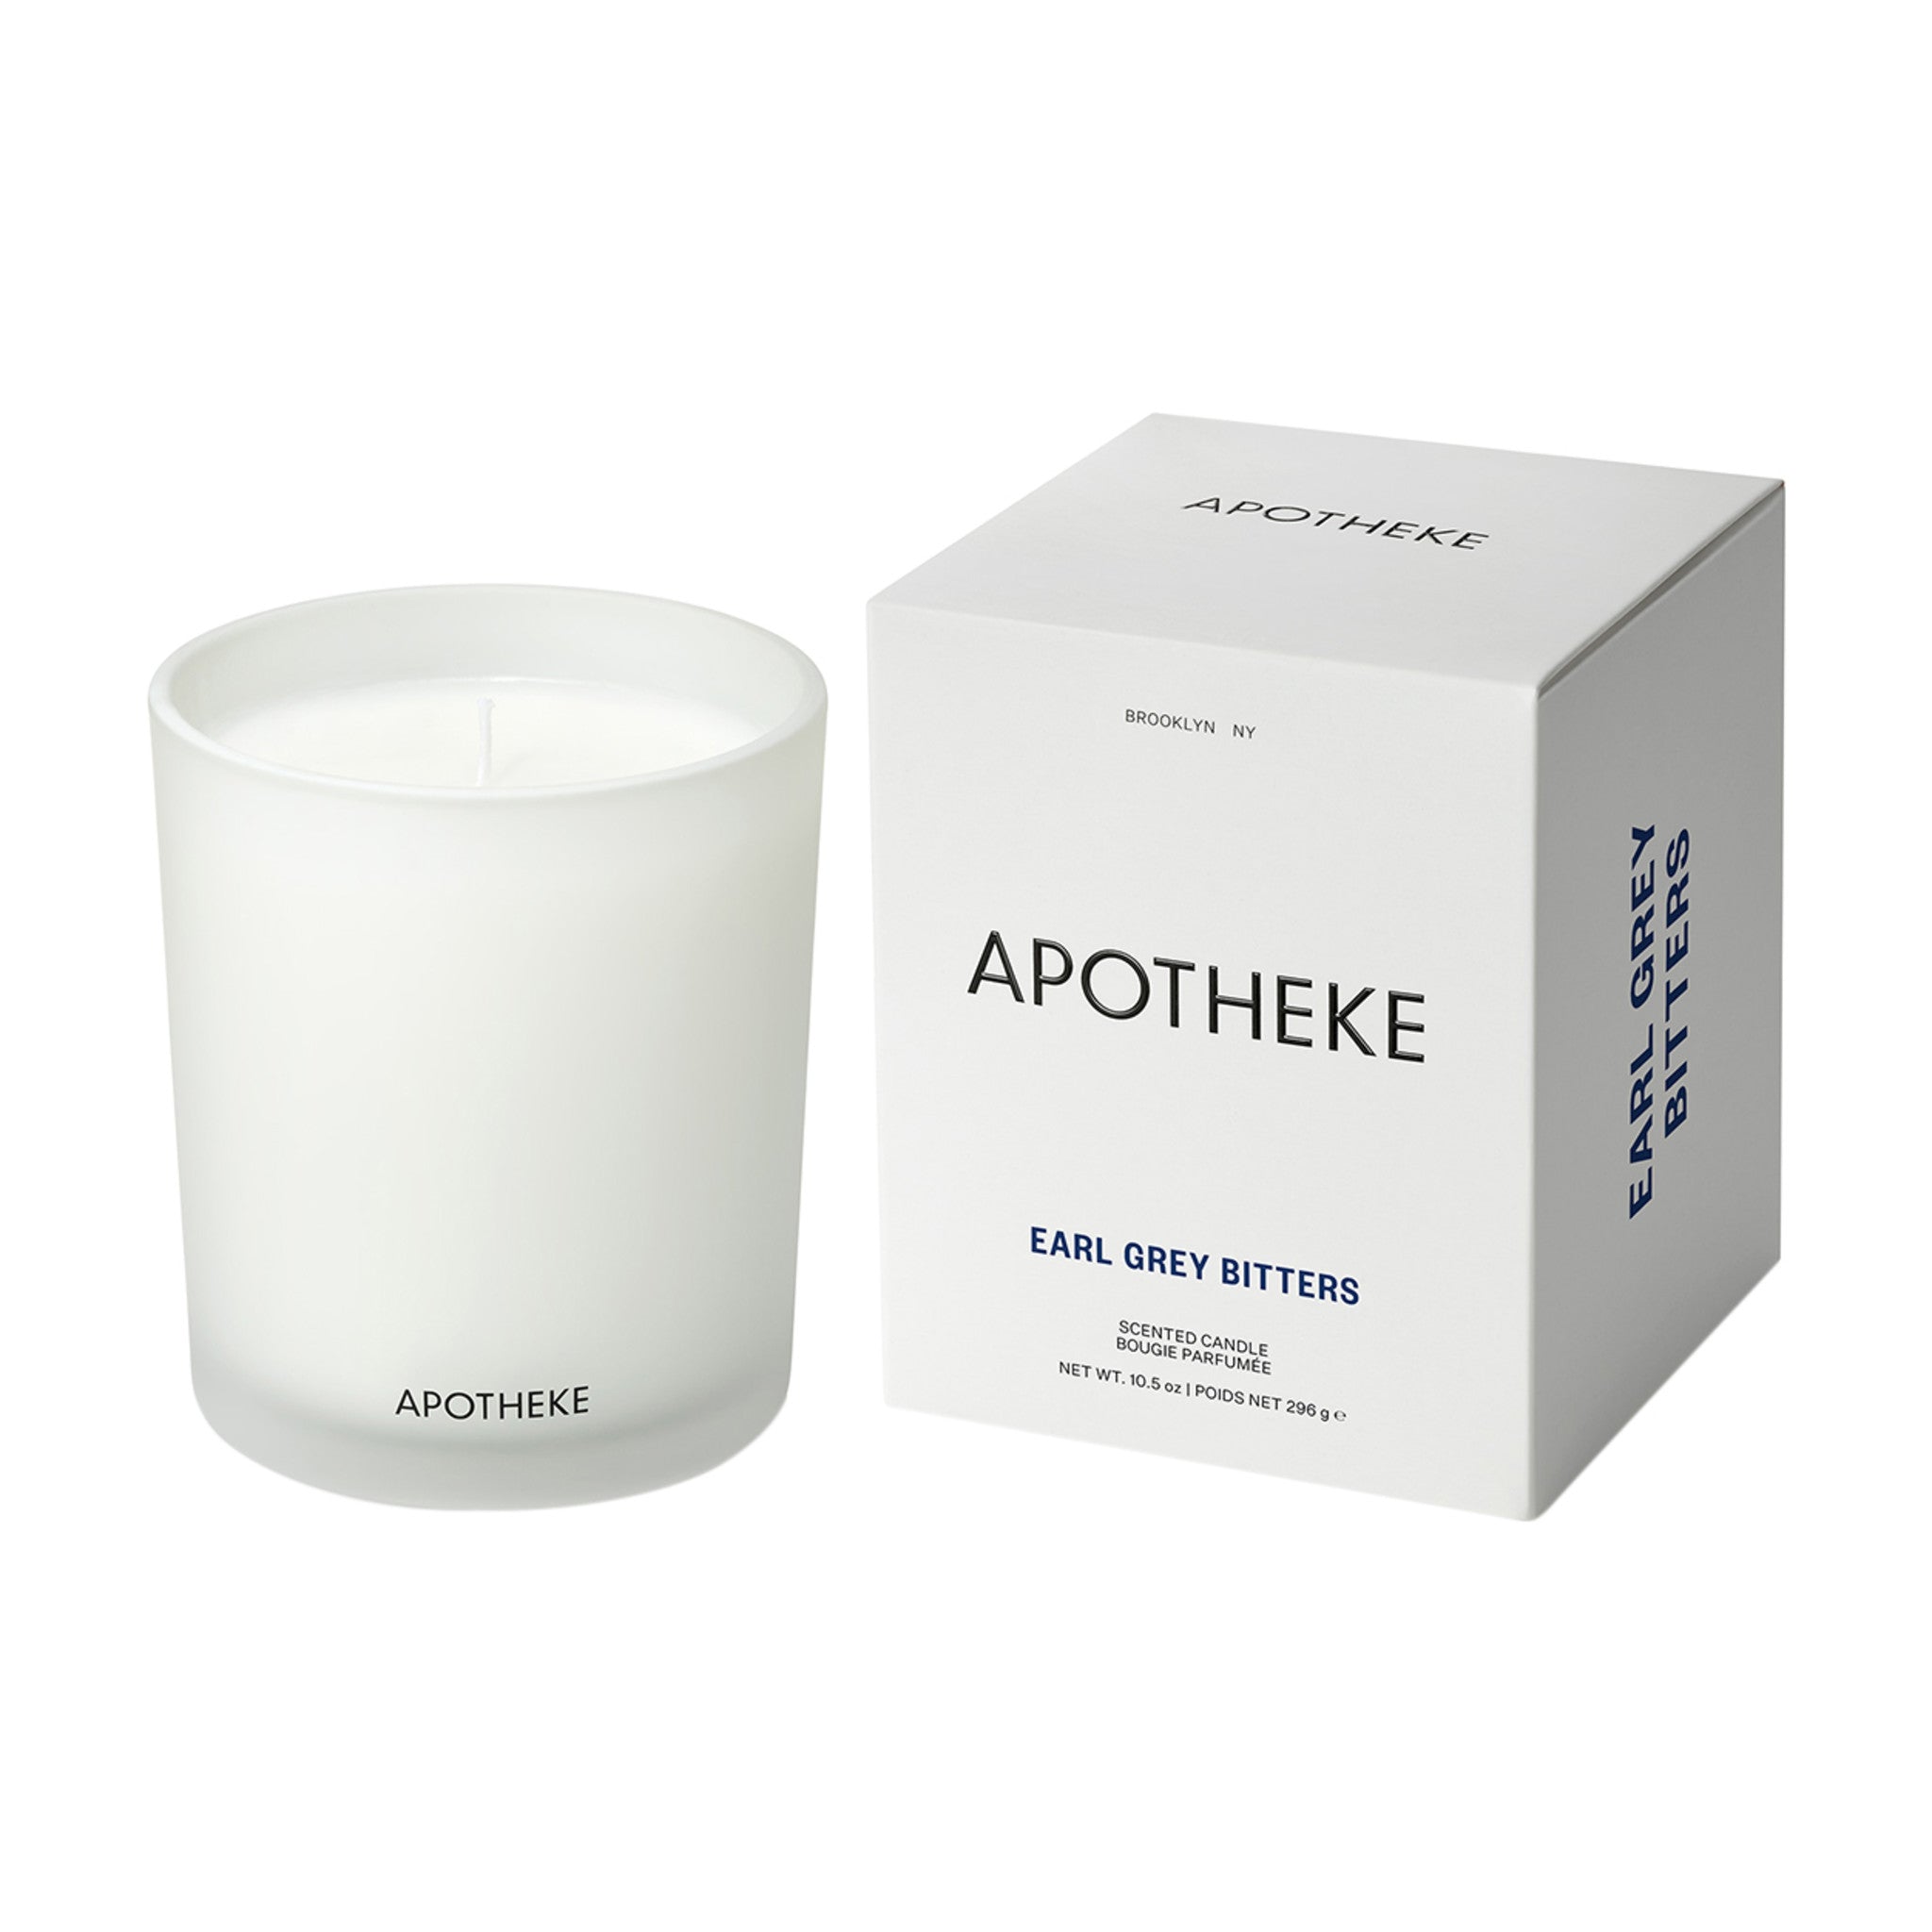 Apotheke Earl Grey Bitters Classic Scented Candle main image.